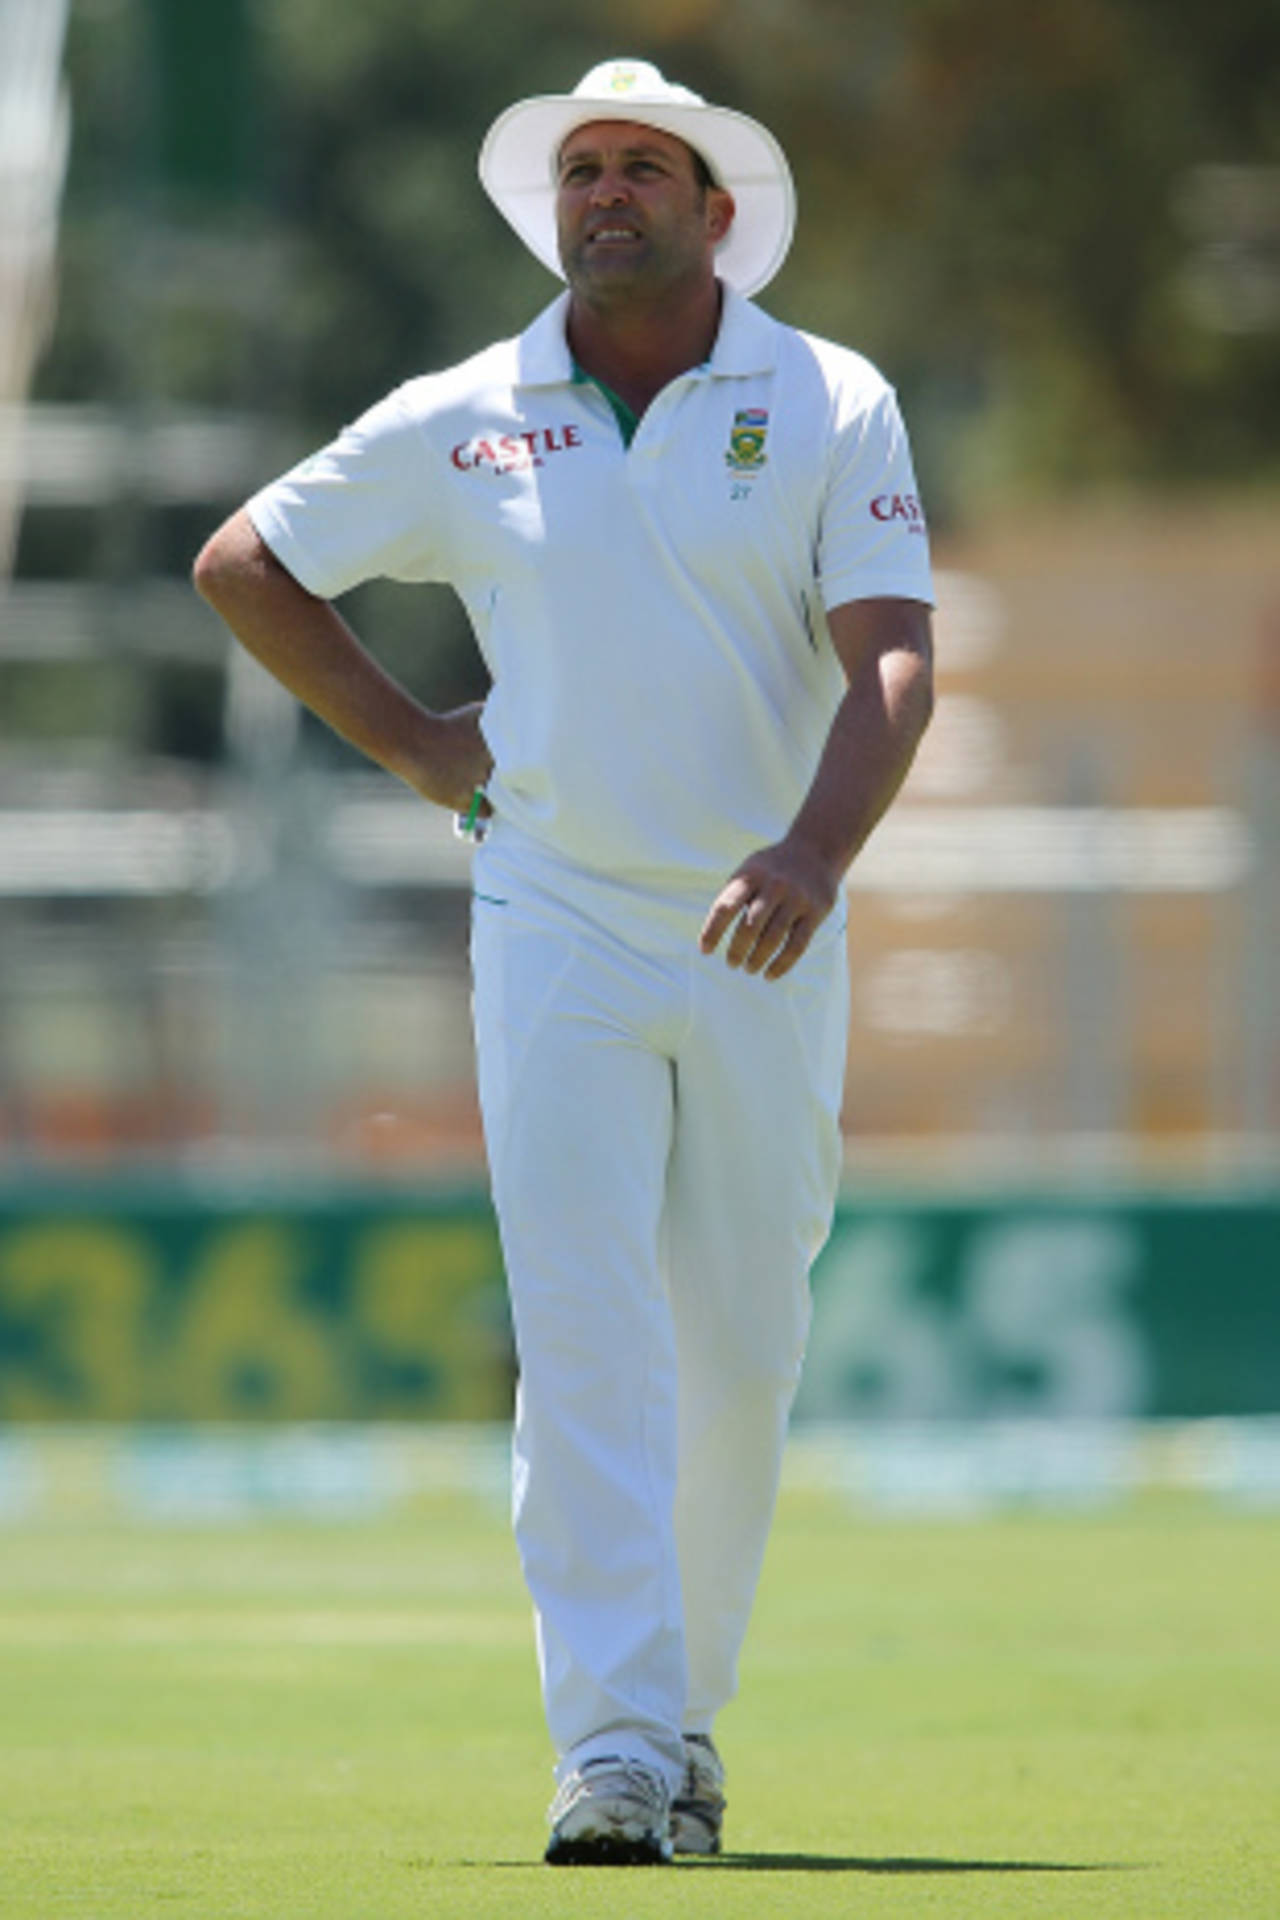 Jacques Kallis left the field due to injury, Australia v South Africa, 2nd Test, Adelaide, 1st day, November 22, 2012